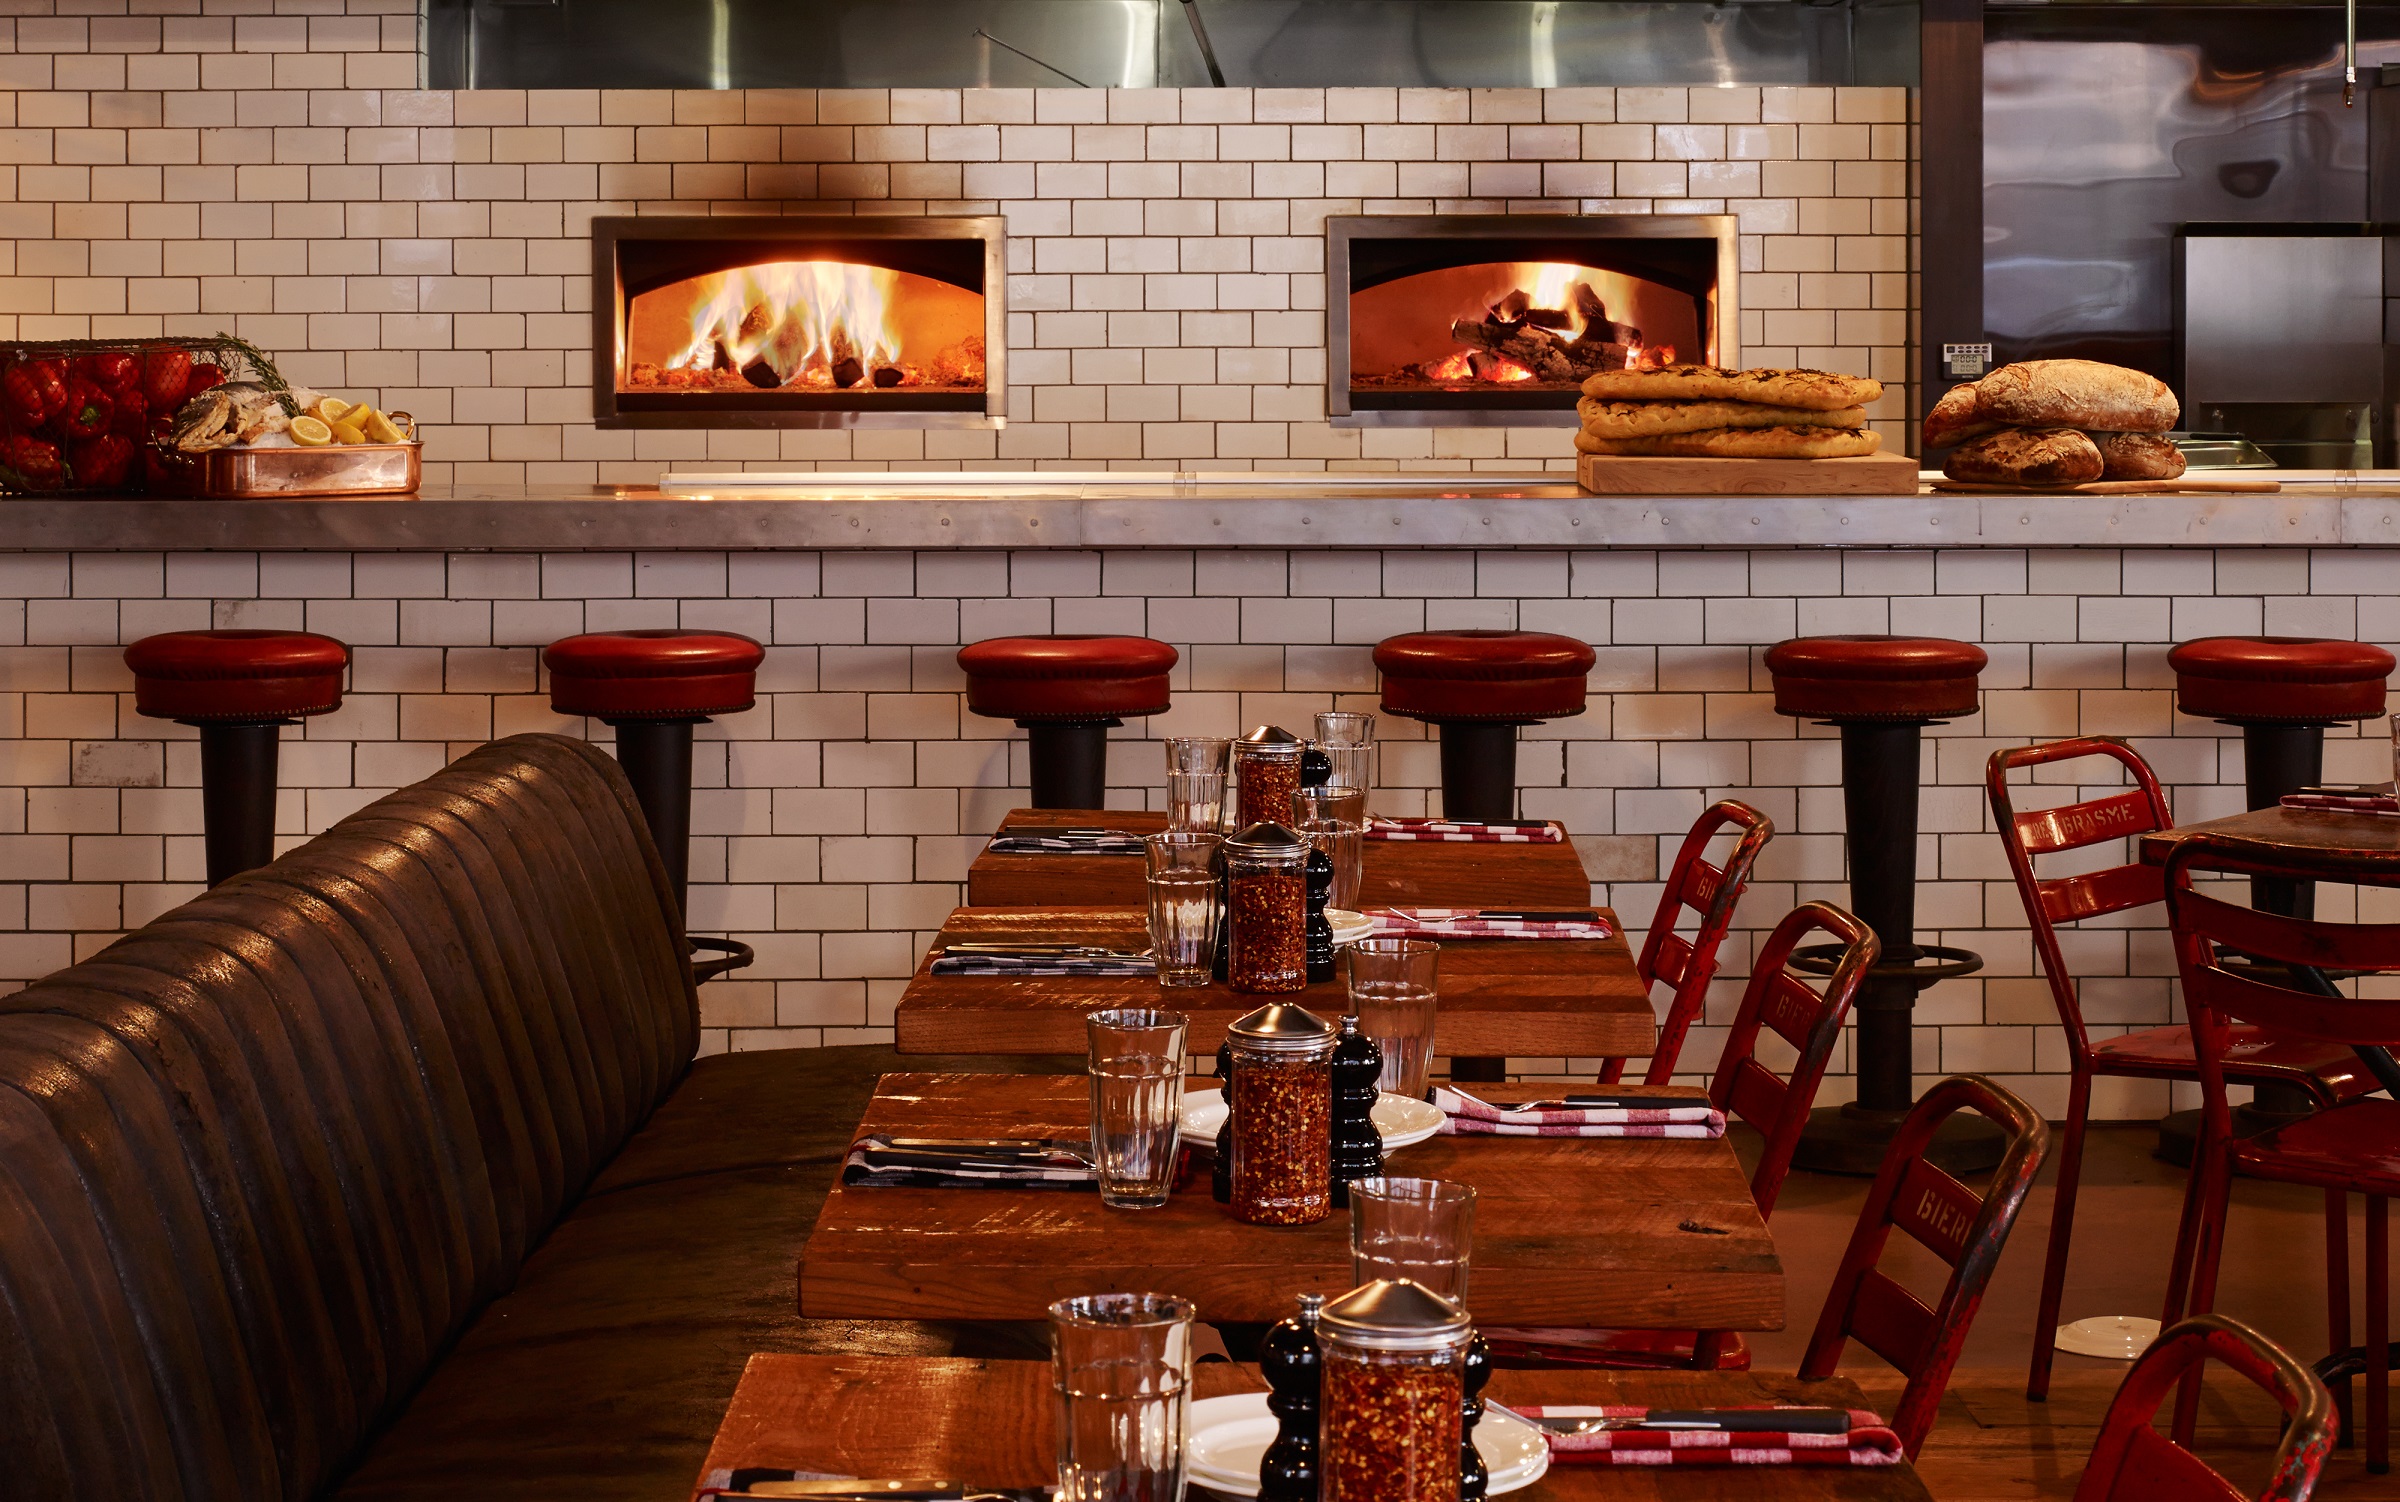 Soho House Chicago_Pizza East_photo credit is Dave Burk of Hedrich Blessing